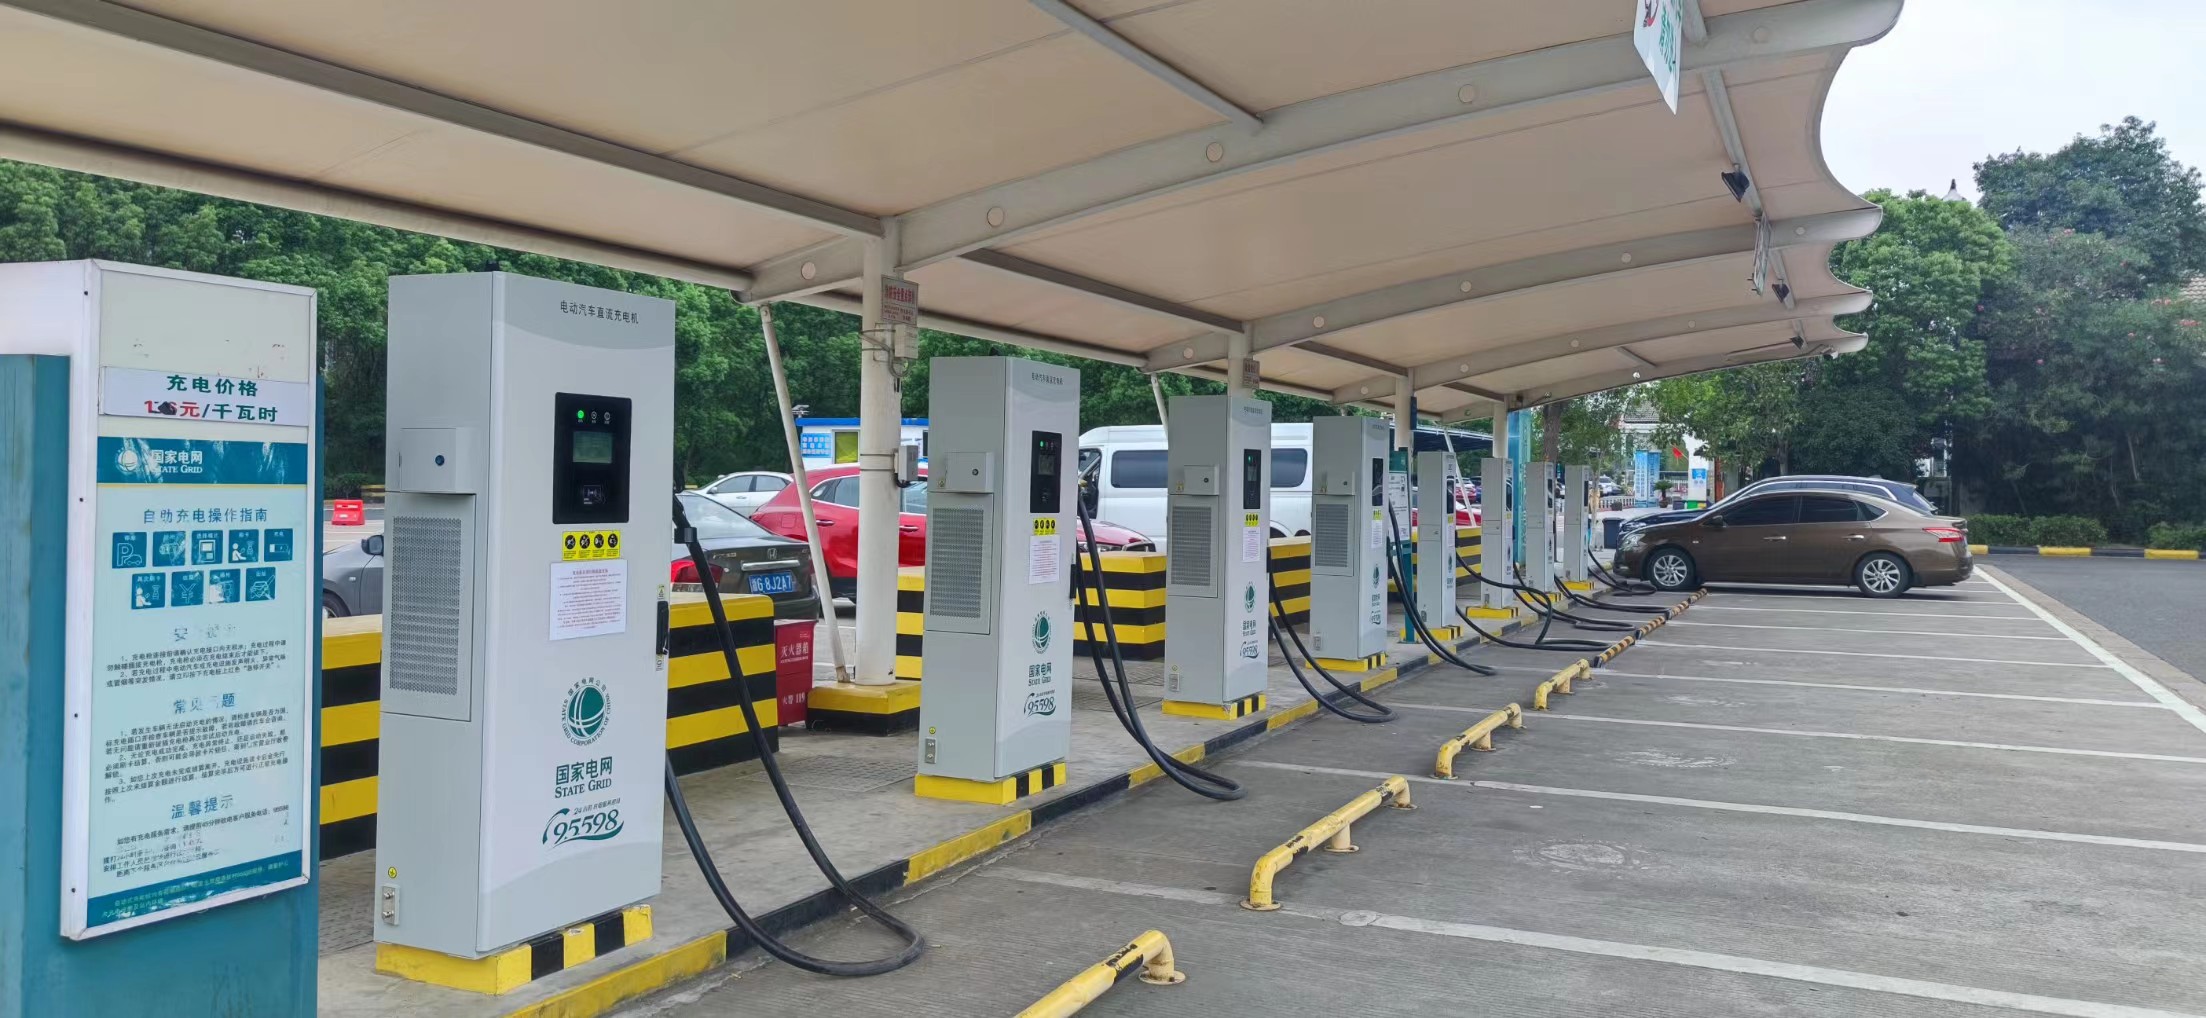 Electric vehicle car charging station